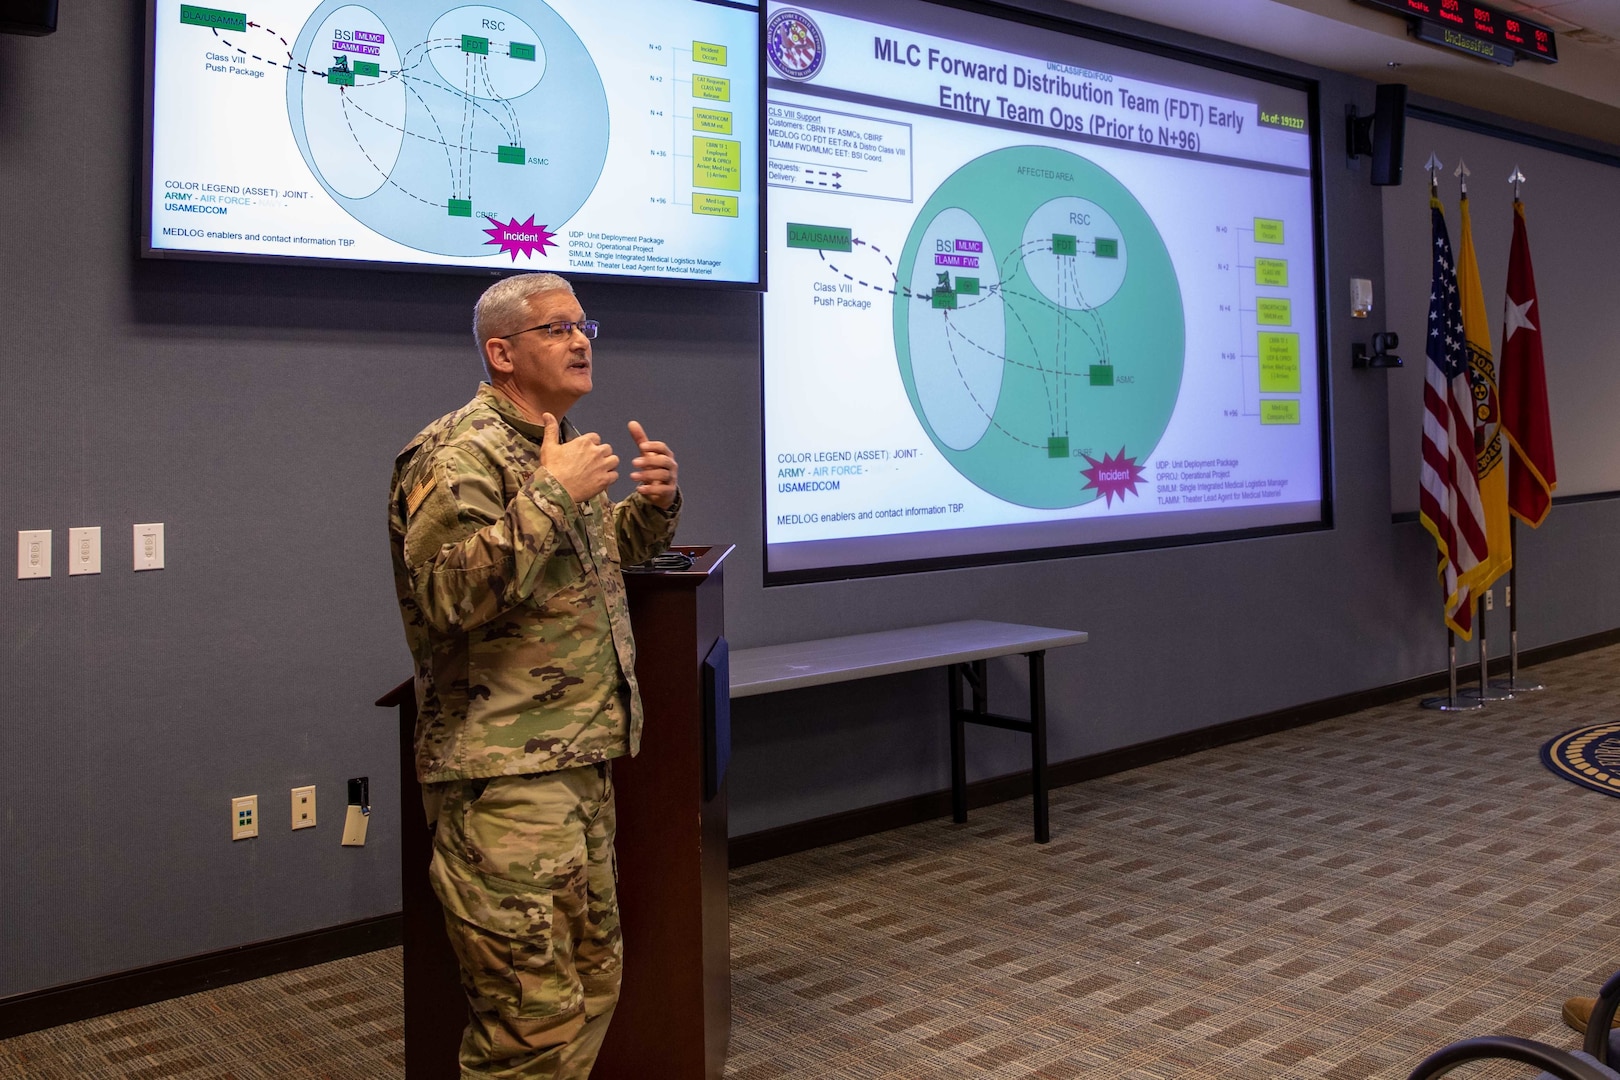 U.S. Air Force Lt. Col. Ronald Greenaway, Joint Task Force Civil Support (JTF-CS) surgeon general’s chief of plans and operations, briefs JTF-CS and Defense Chemical, Biological, Radiological and Nuclear (CBRN) Response Force (DCRF) command and staff during the command’s Exercise Sudden Response 2020 (SR20) staff academics conference, held at the command’s headquarters, Jan. 6-8. During the event, JTF-CS and DCRF personnel focused on major movements and friction points that would be encountered during the deployment and operation phases of SR20. (Official DoD photo by Mass Communication Specialist 3rd Class Michael Redd/RELEASED)